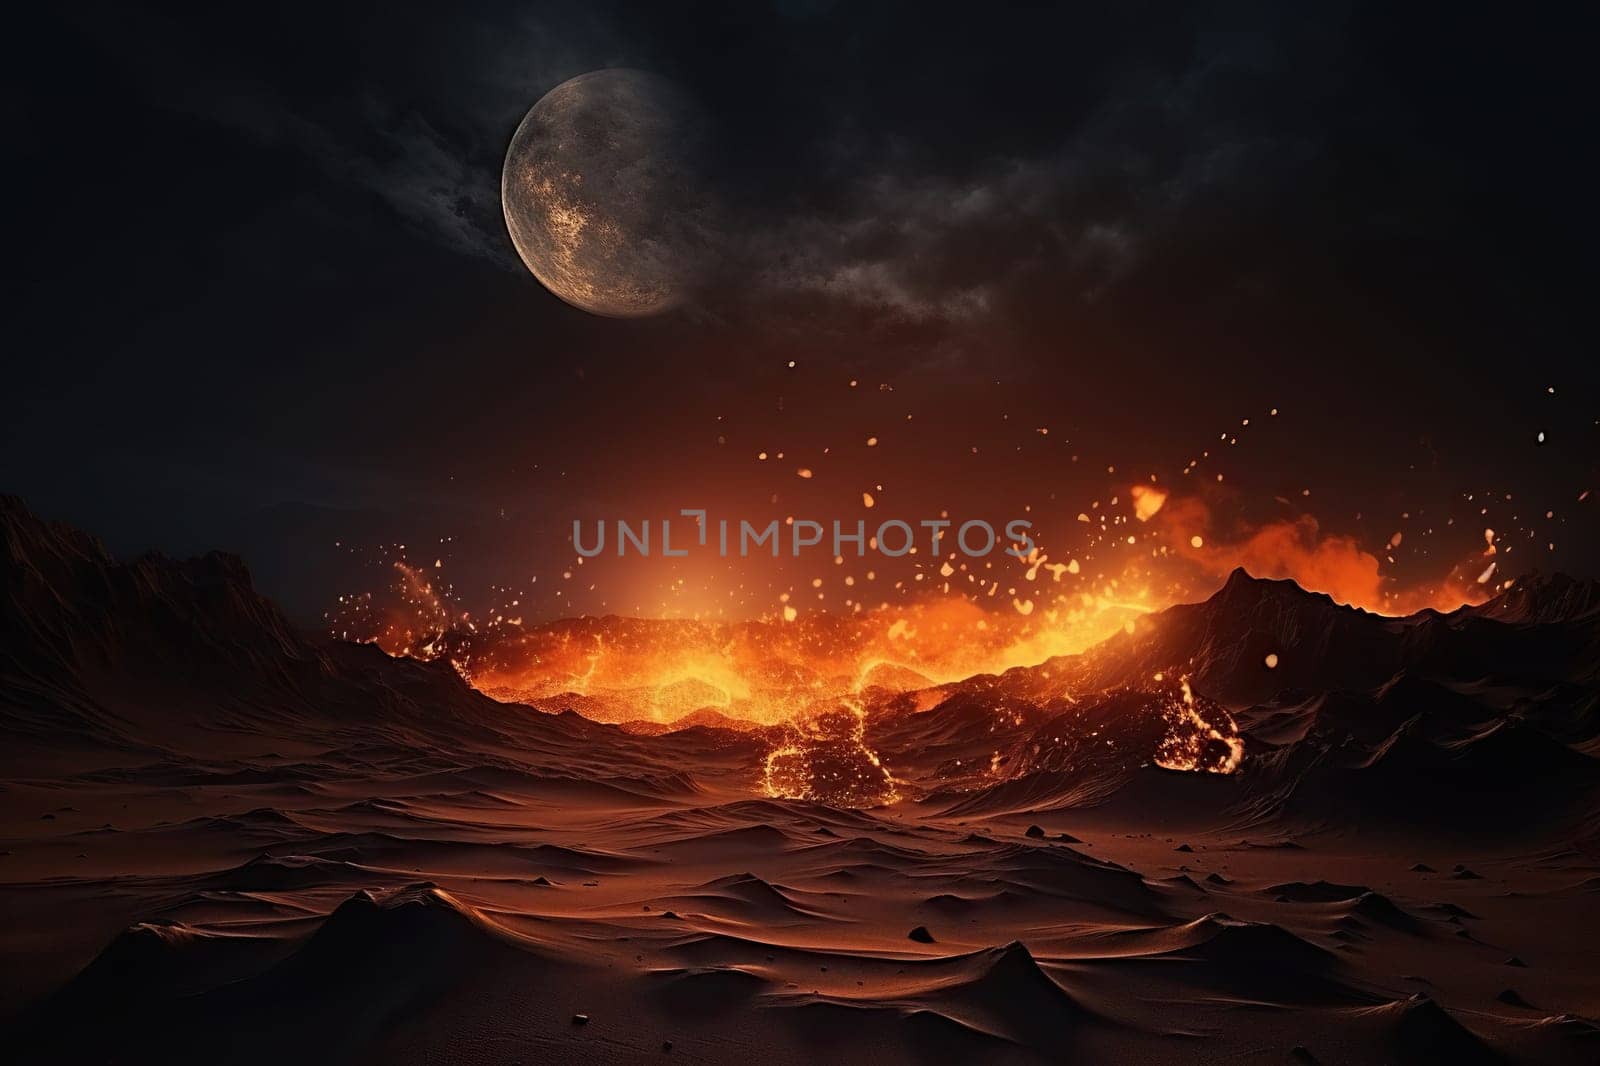 Night desert with fires on the sand in the light of a bright moon on a cloudy sky.